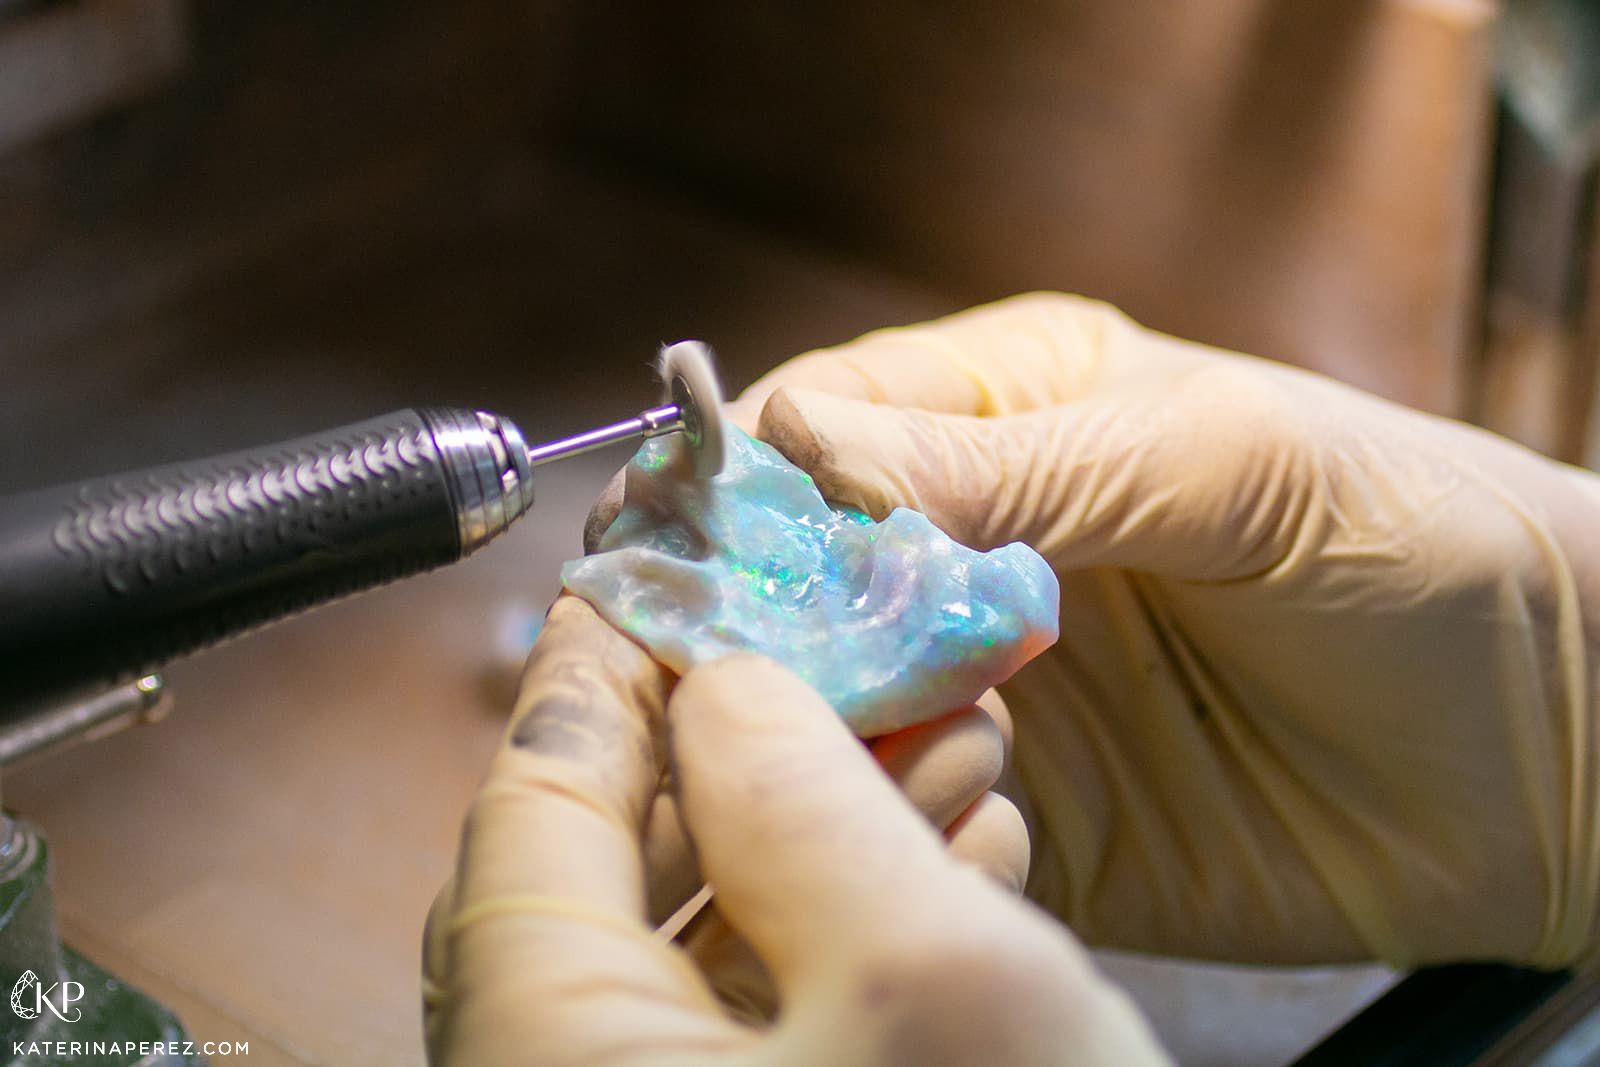 Emil Weis Opals has mastered the meticulous process of cutting and polishing rare opal specimens